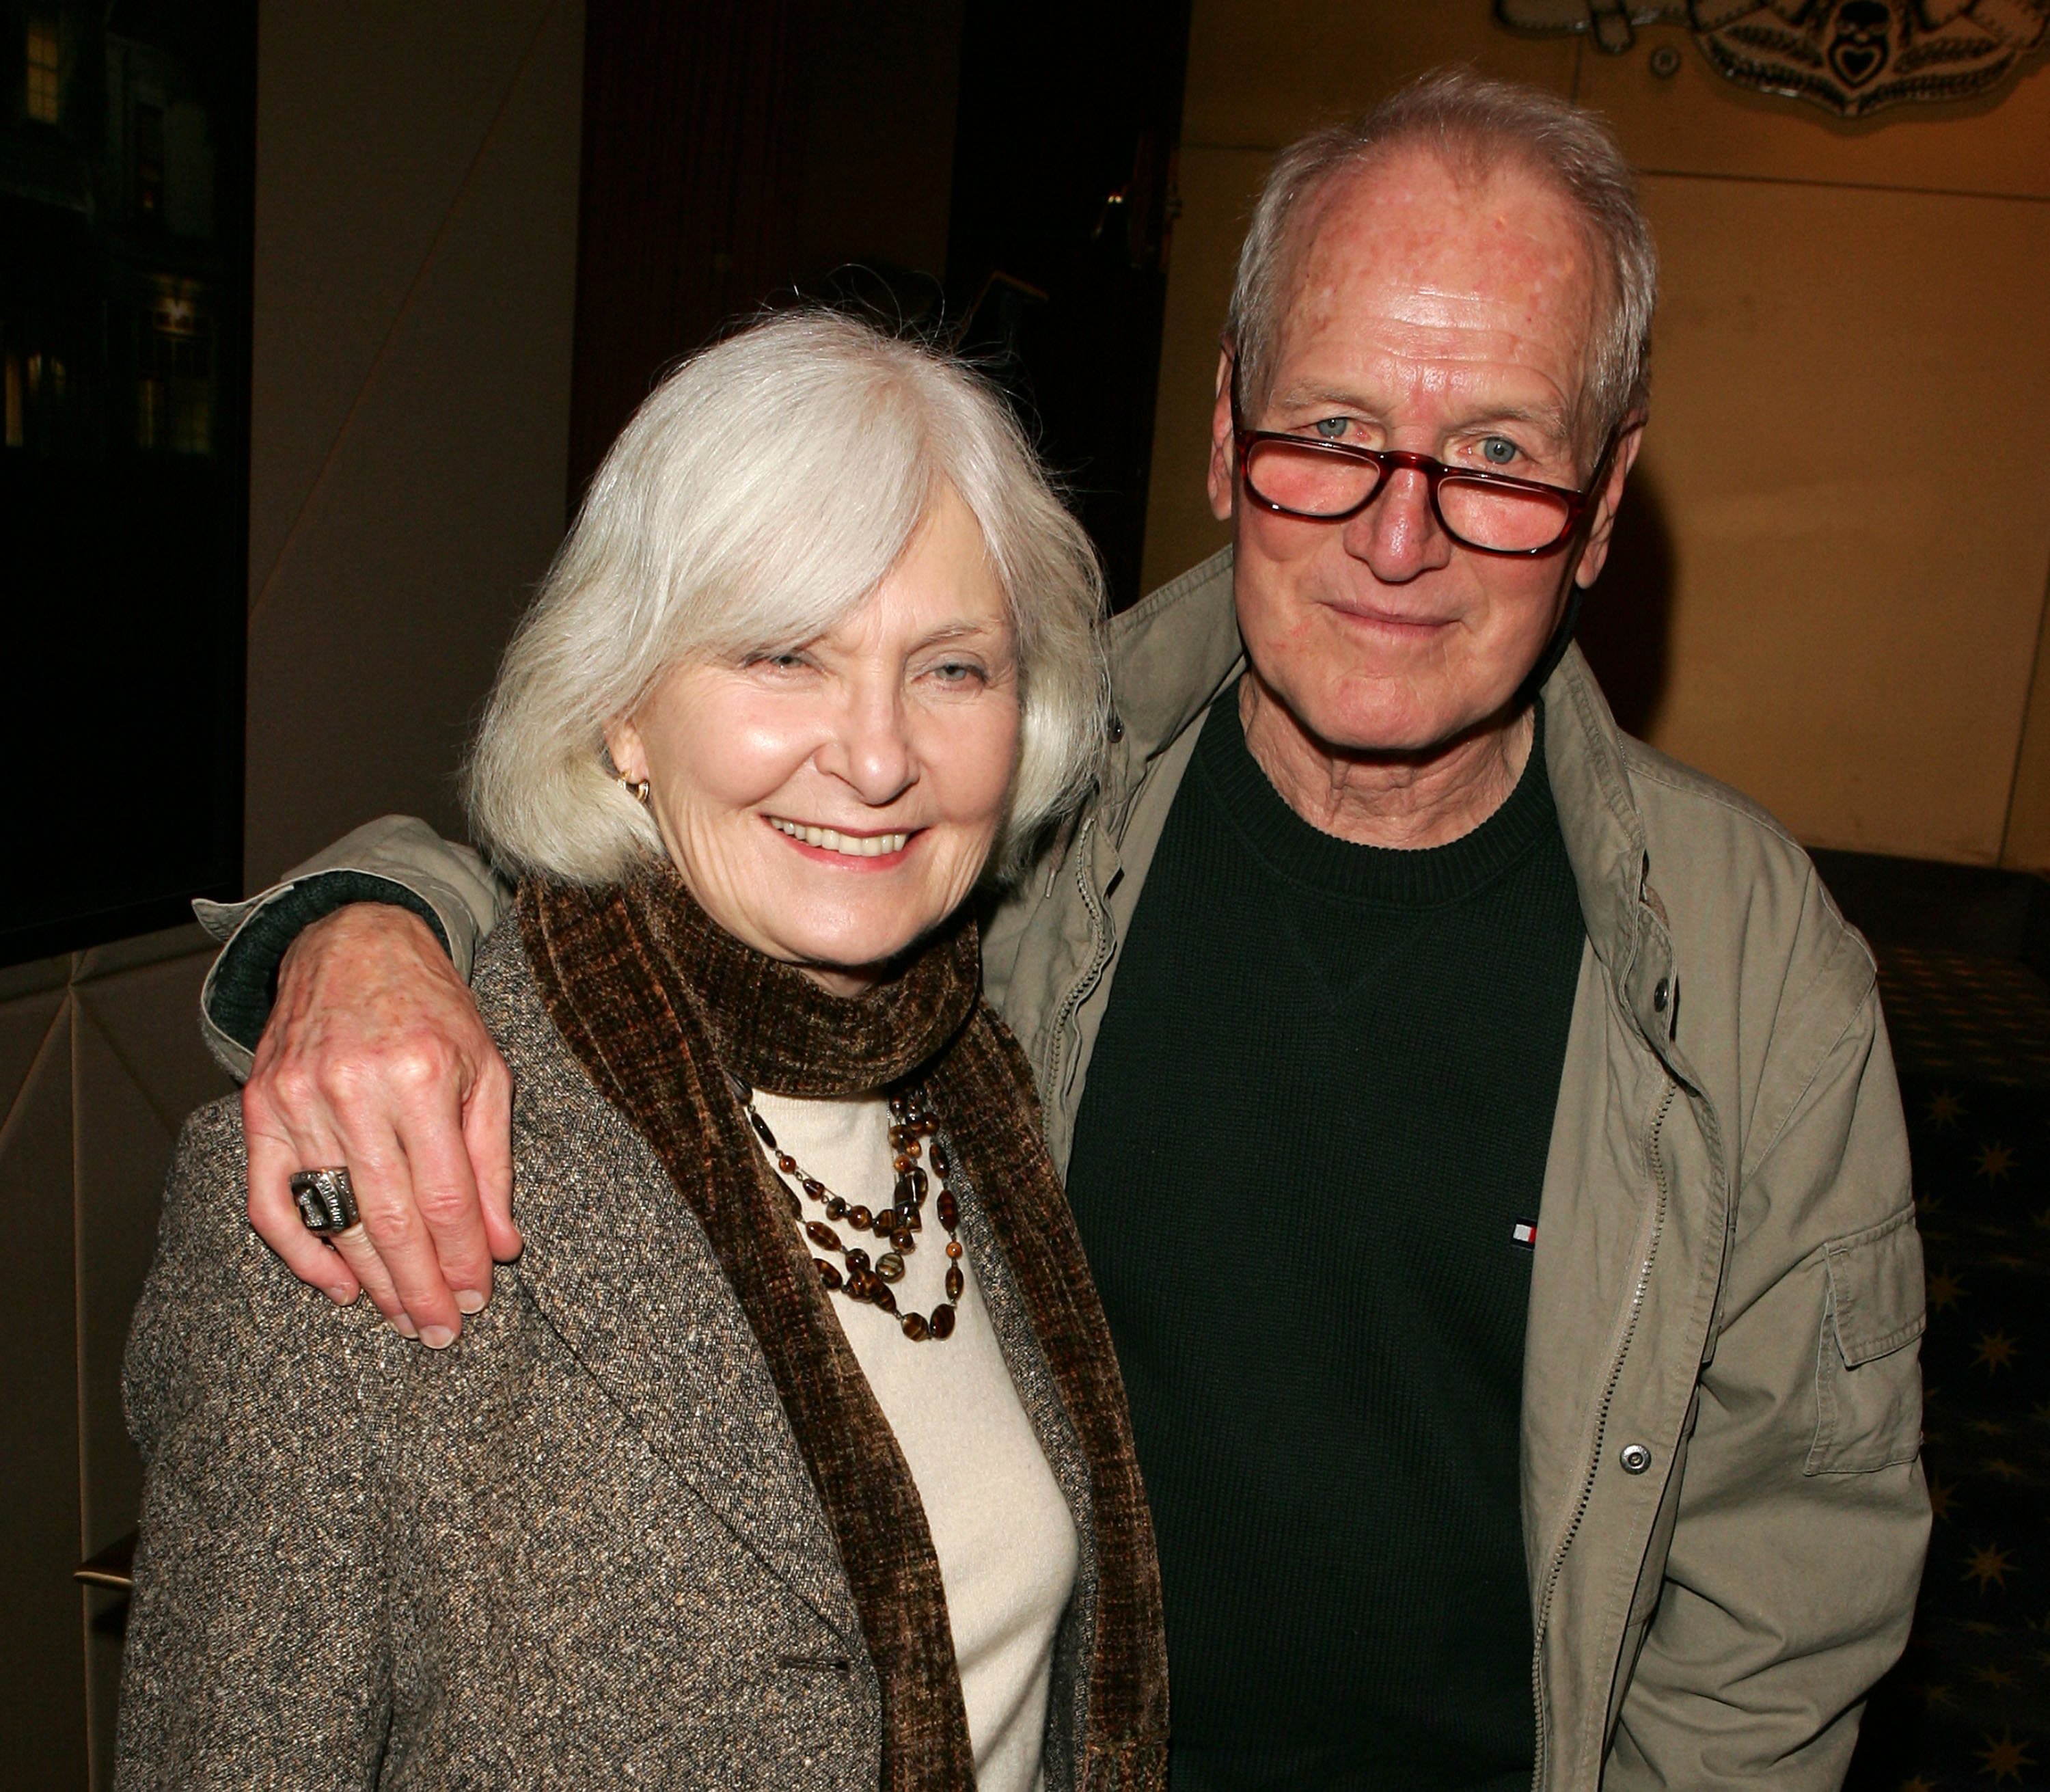 Joanne Woodward and Paul Newman attend a reception for a special screening of "The Woodsman," 2004, New York City. | Photo: Getty Images